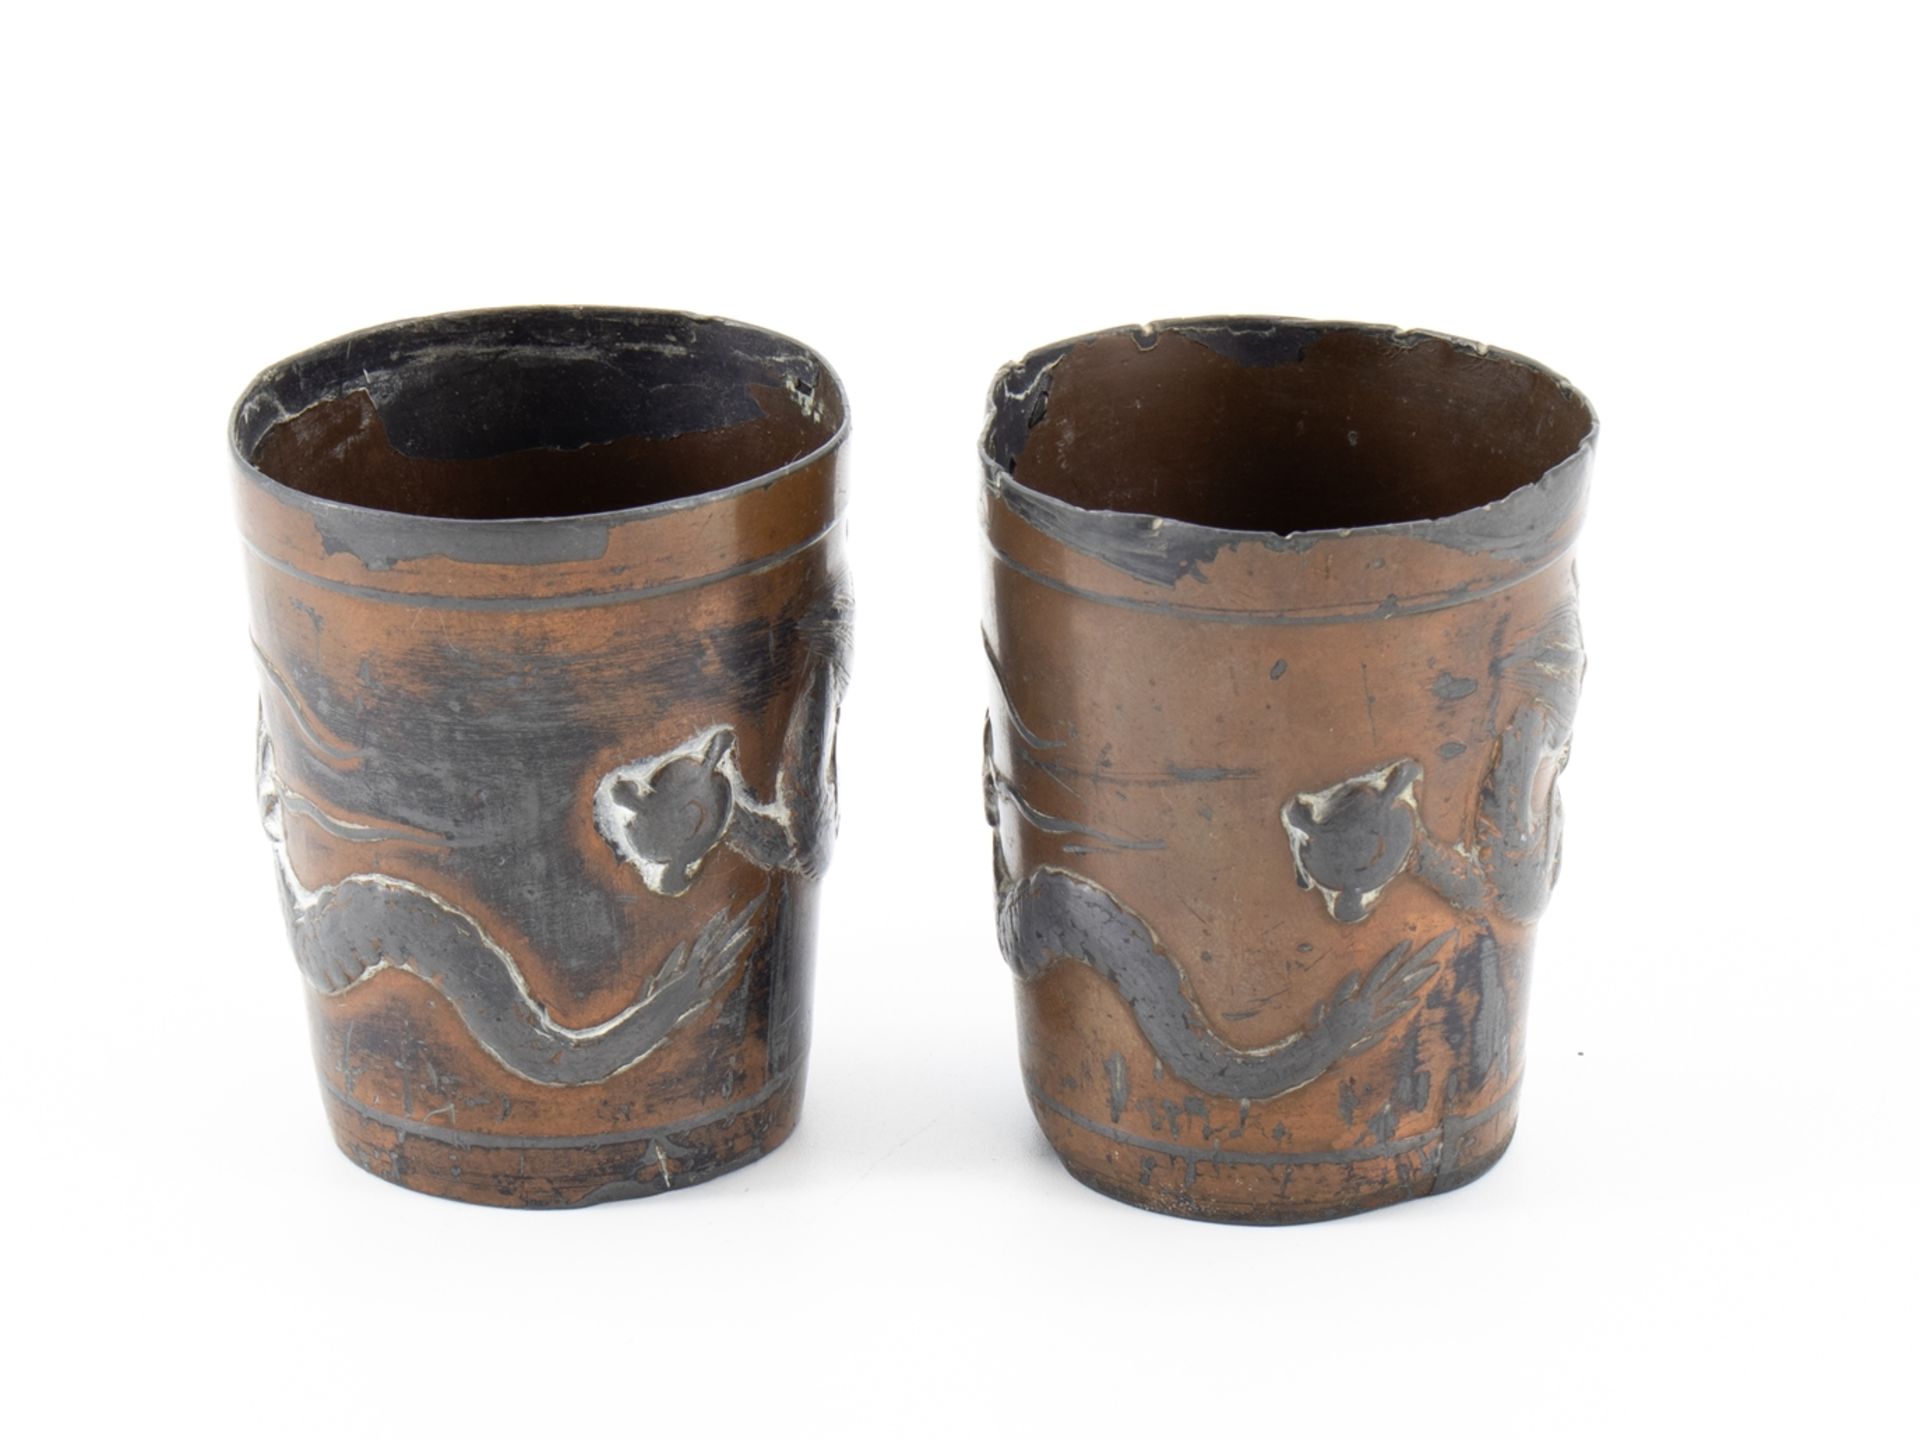 4 cups with dragon motif, China, around 1900 - Image 3 of 12